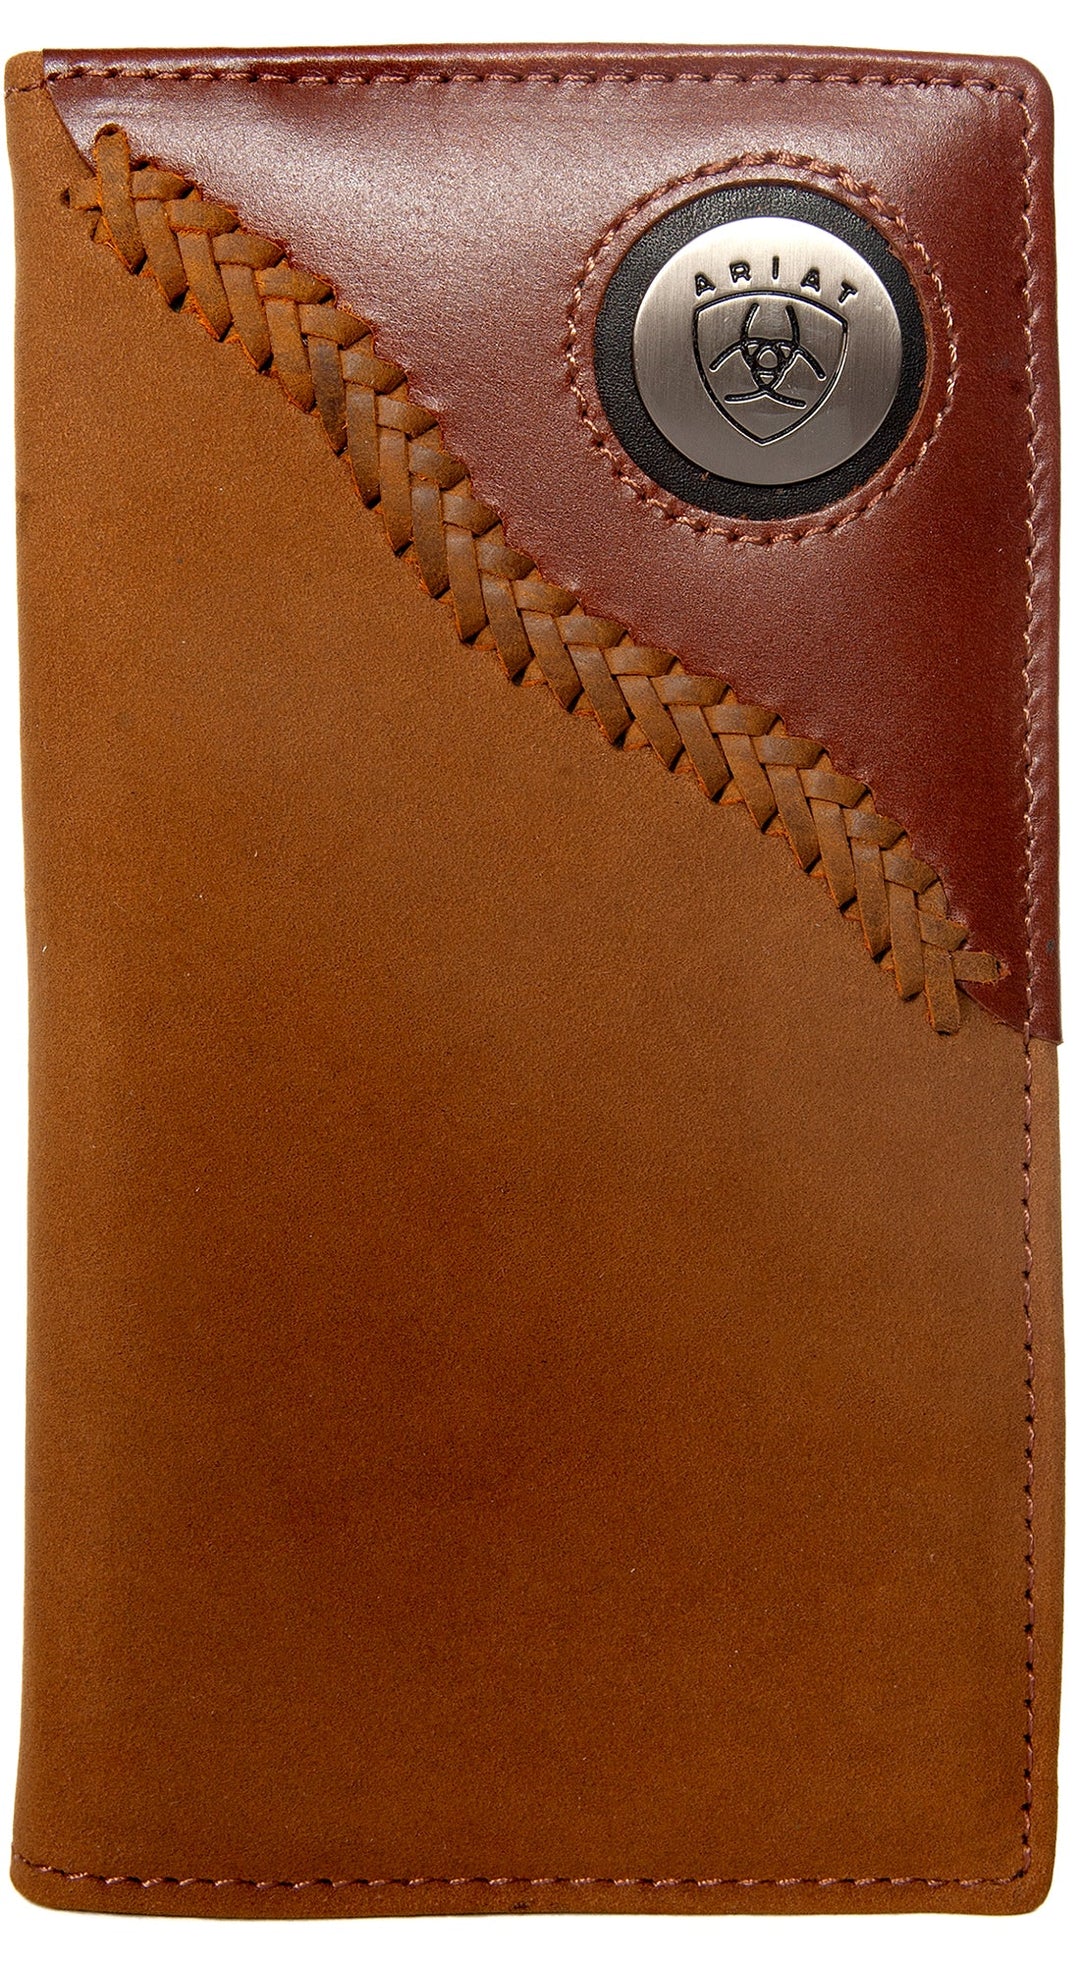 Ariat - WLT1113A Rodeo Wallet Two Toned Stitched